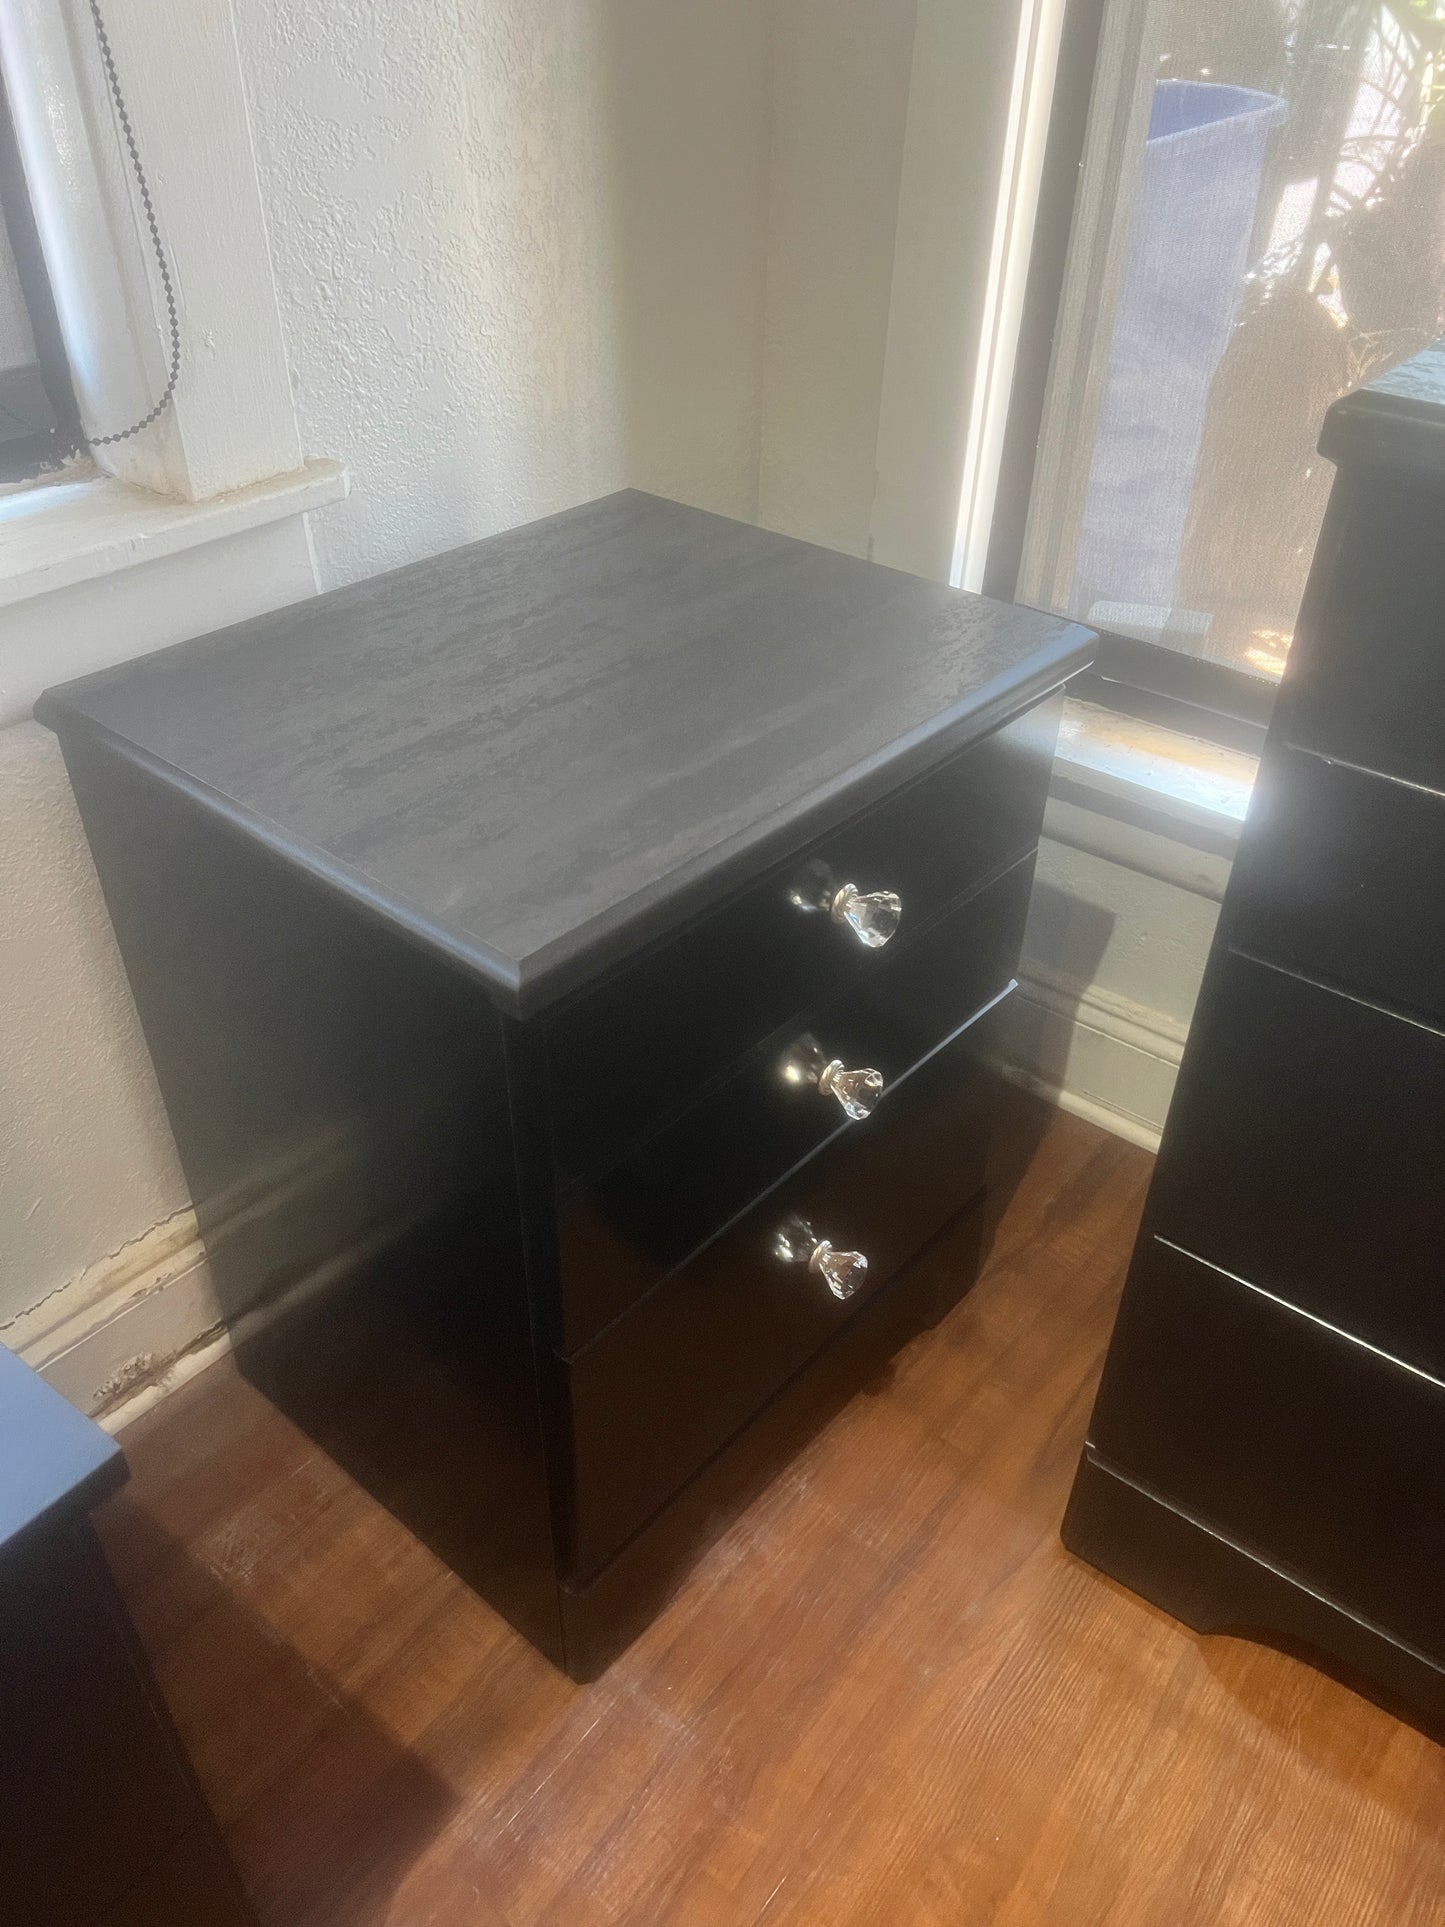 Brand new, Made in USA, Pre-assembled, 4 Piece bedroom set. Comes with 6 drawer dresser, mirror, 5 chest of drawers, and night stands